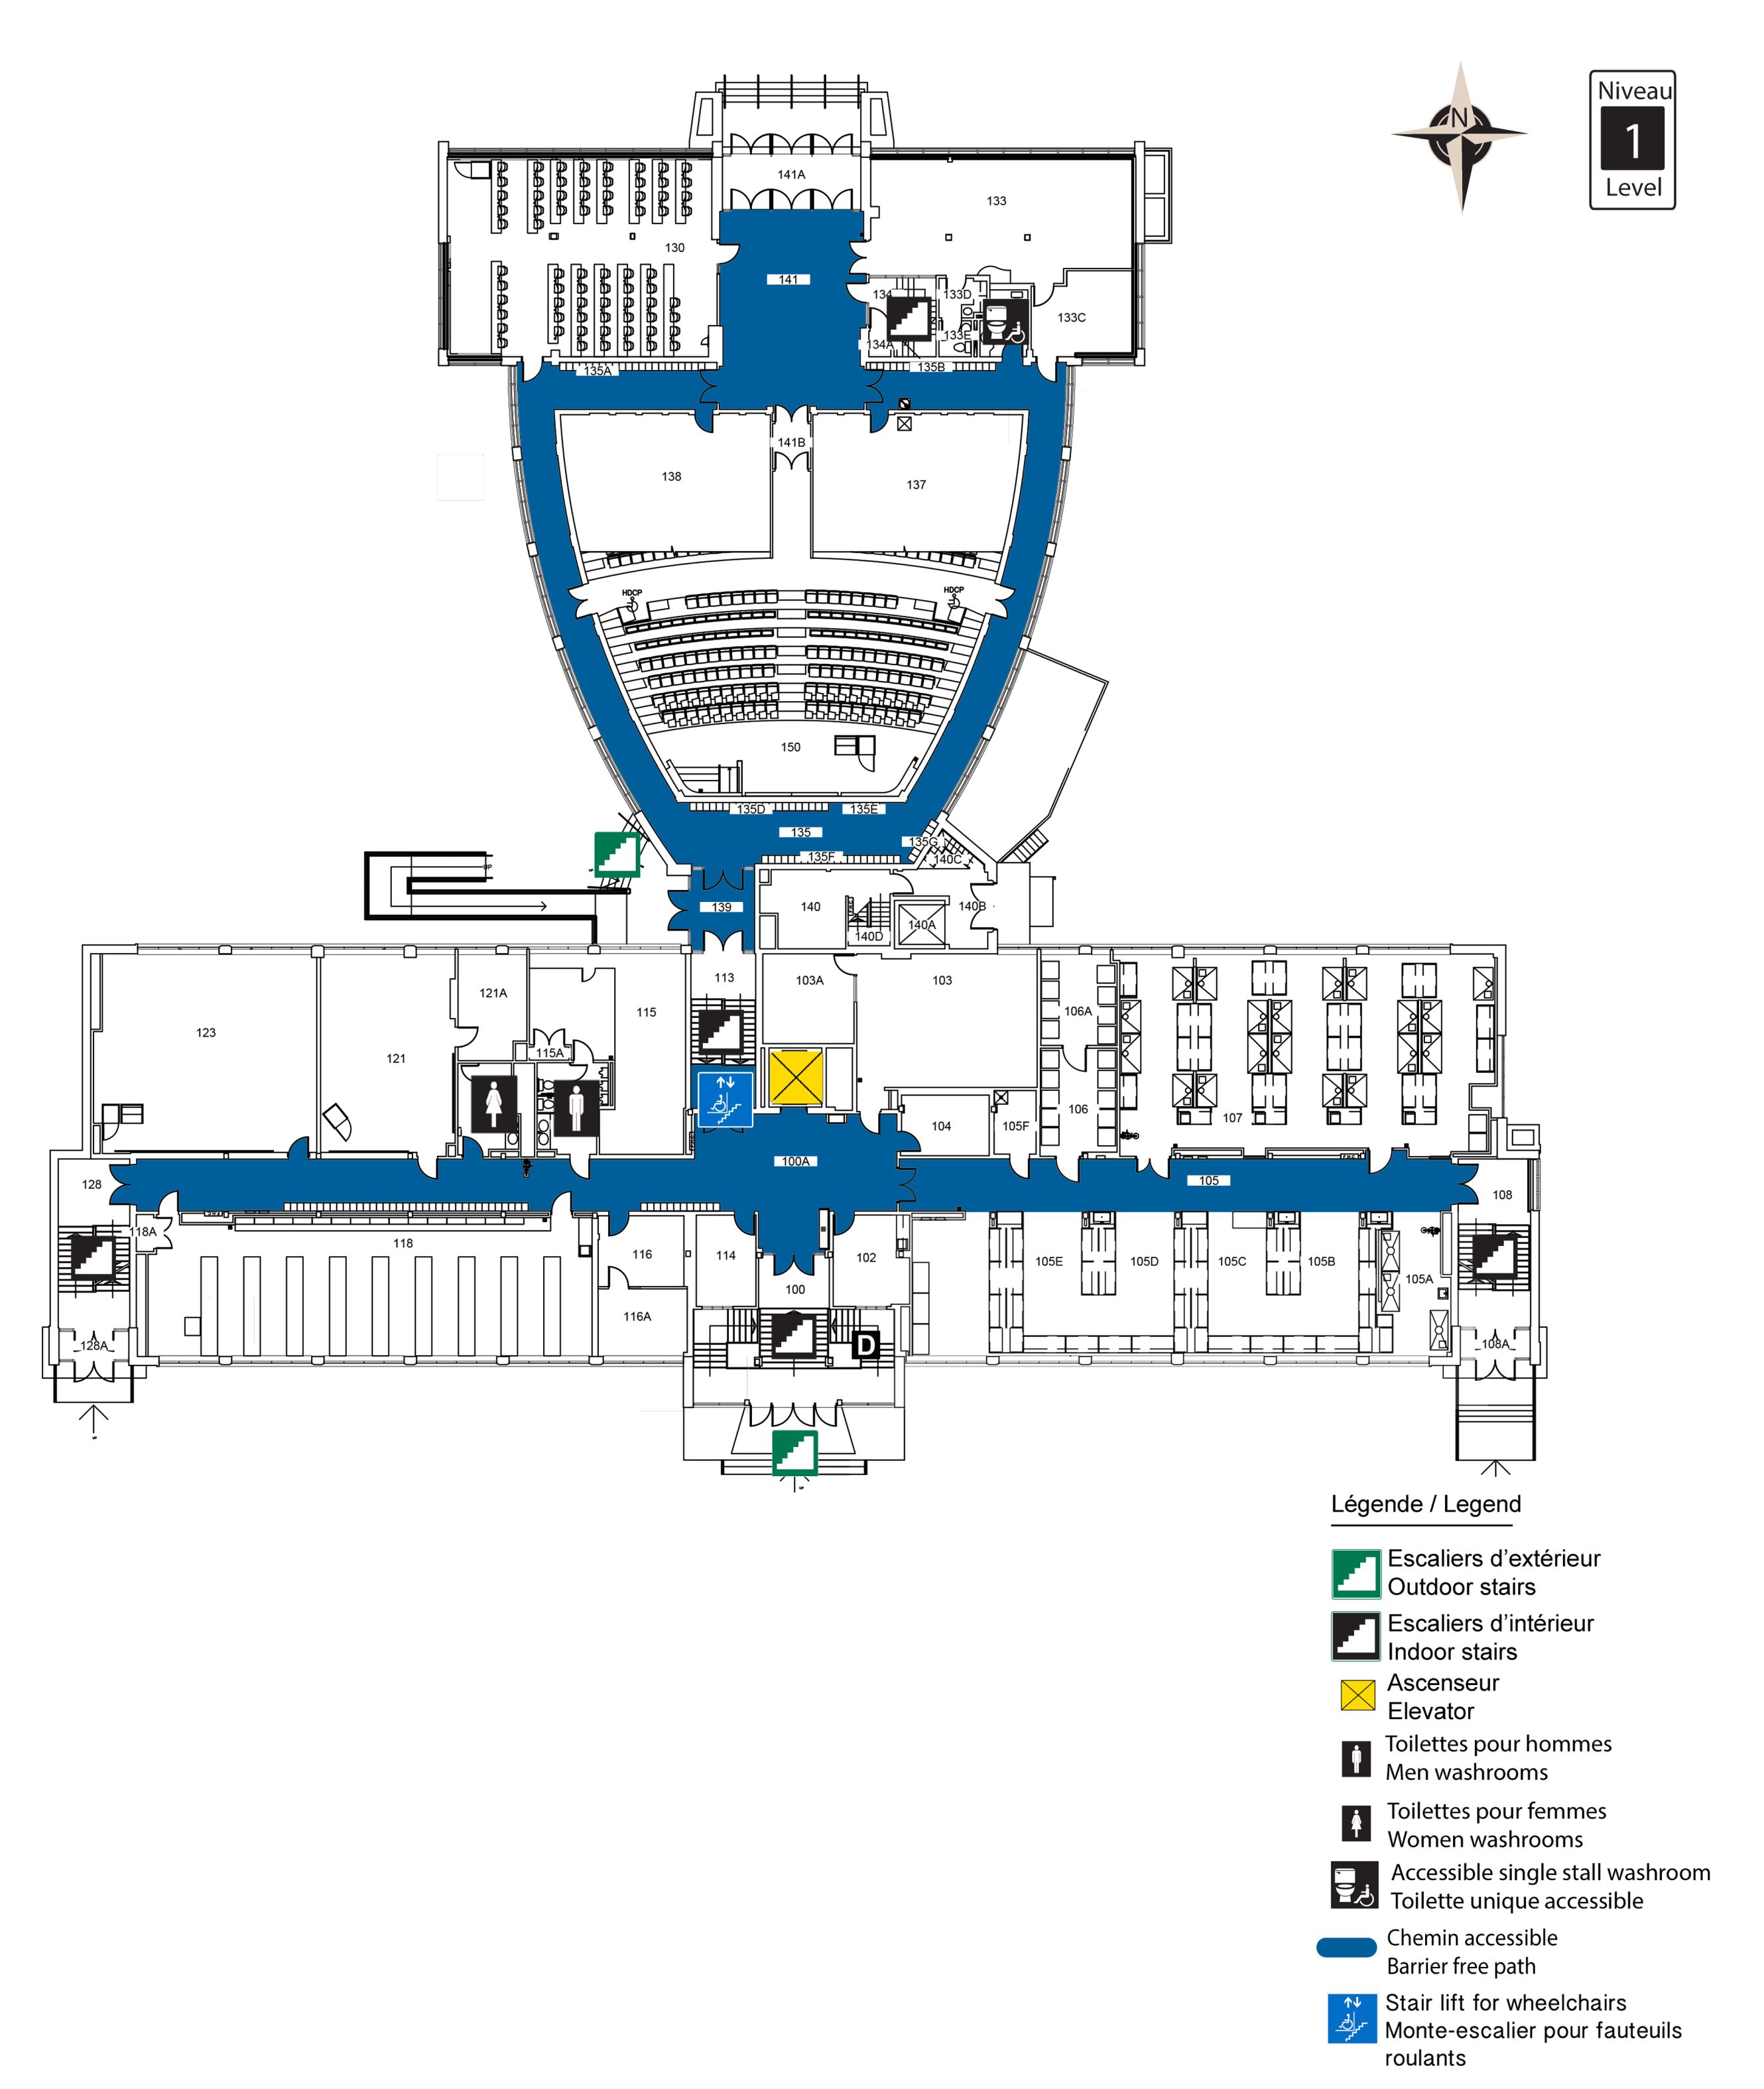 Accessible map - MRN level 1